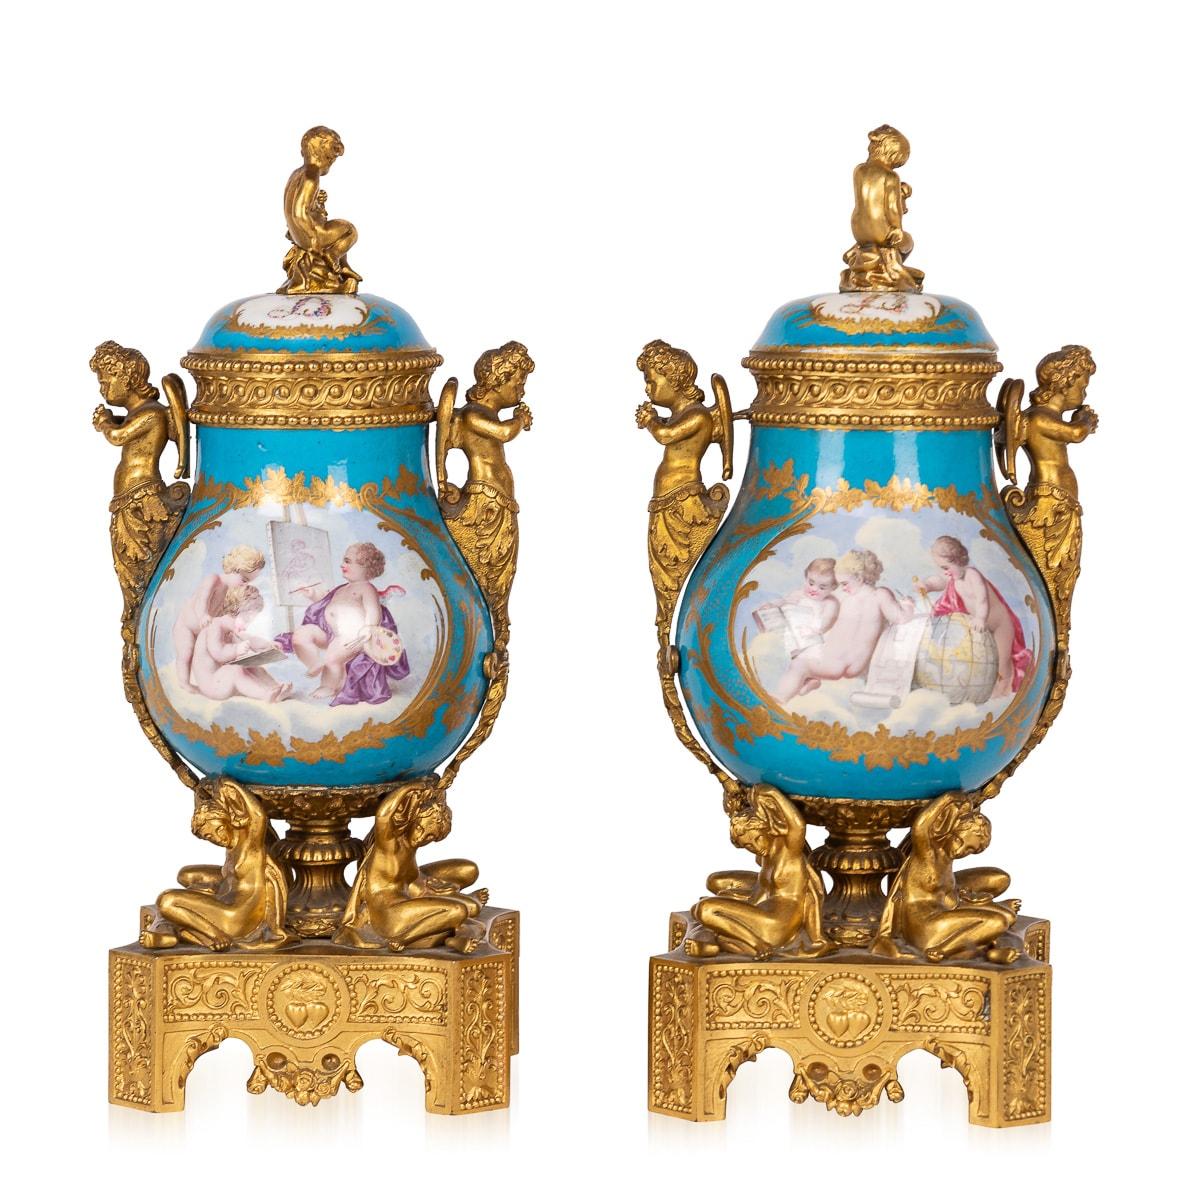 French Antique 19th Century Sèvres Style Ormolu Mounted Vases With Cover For Sale